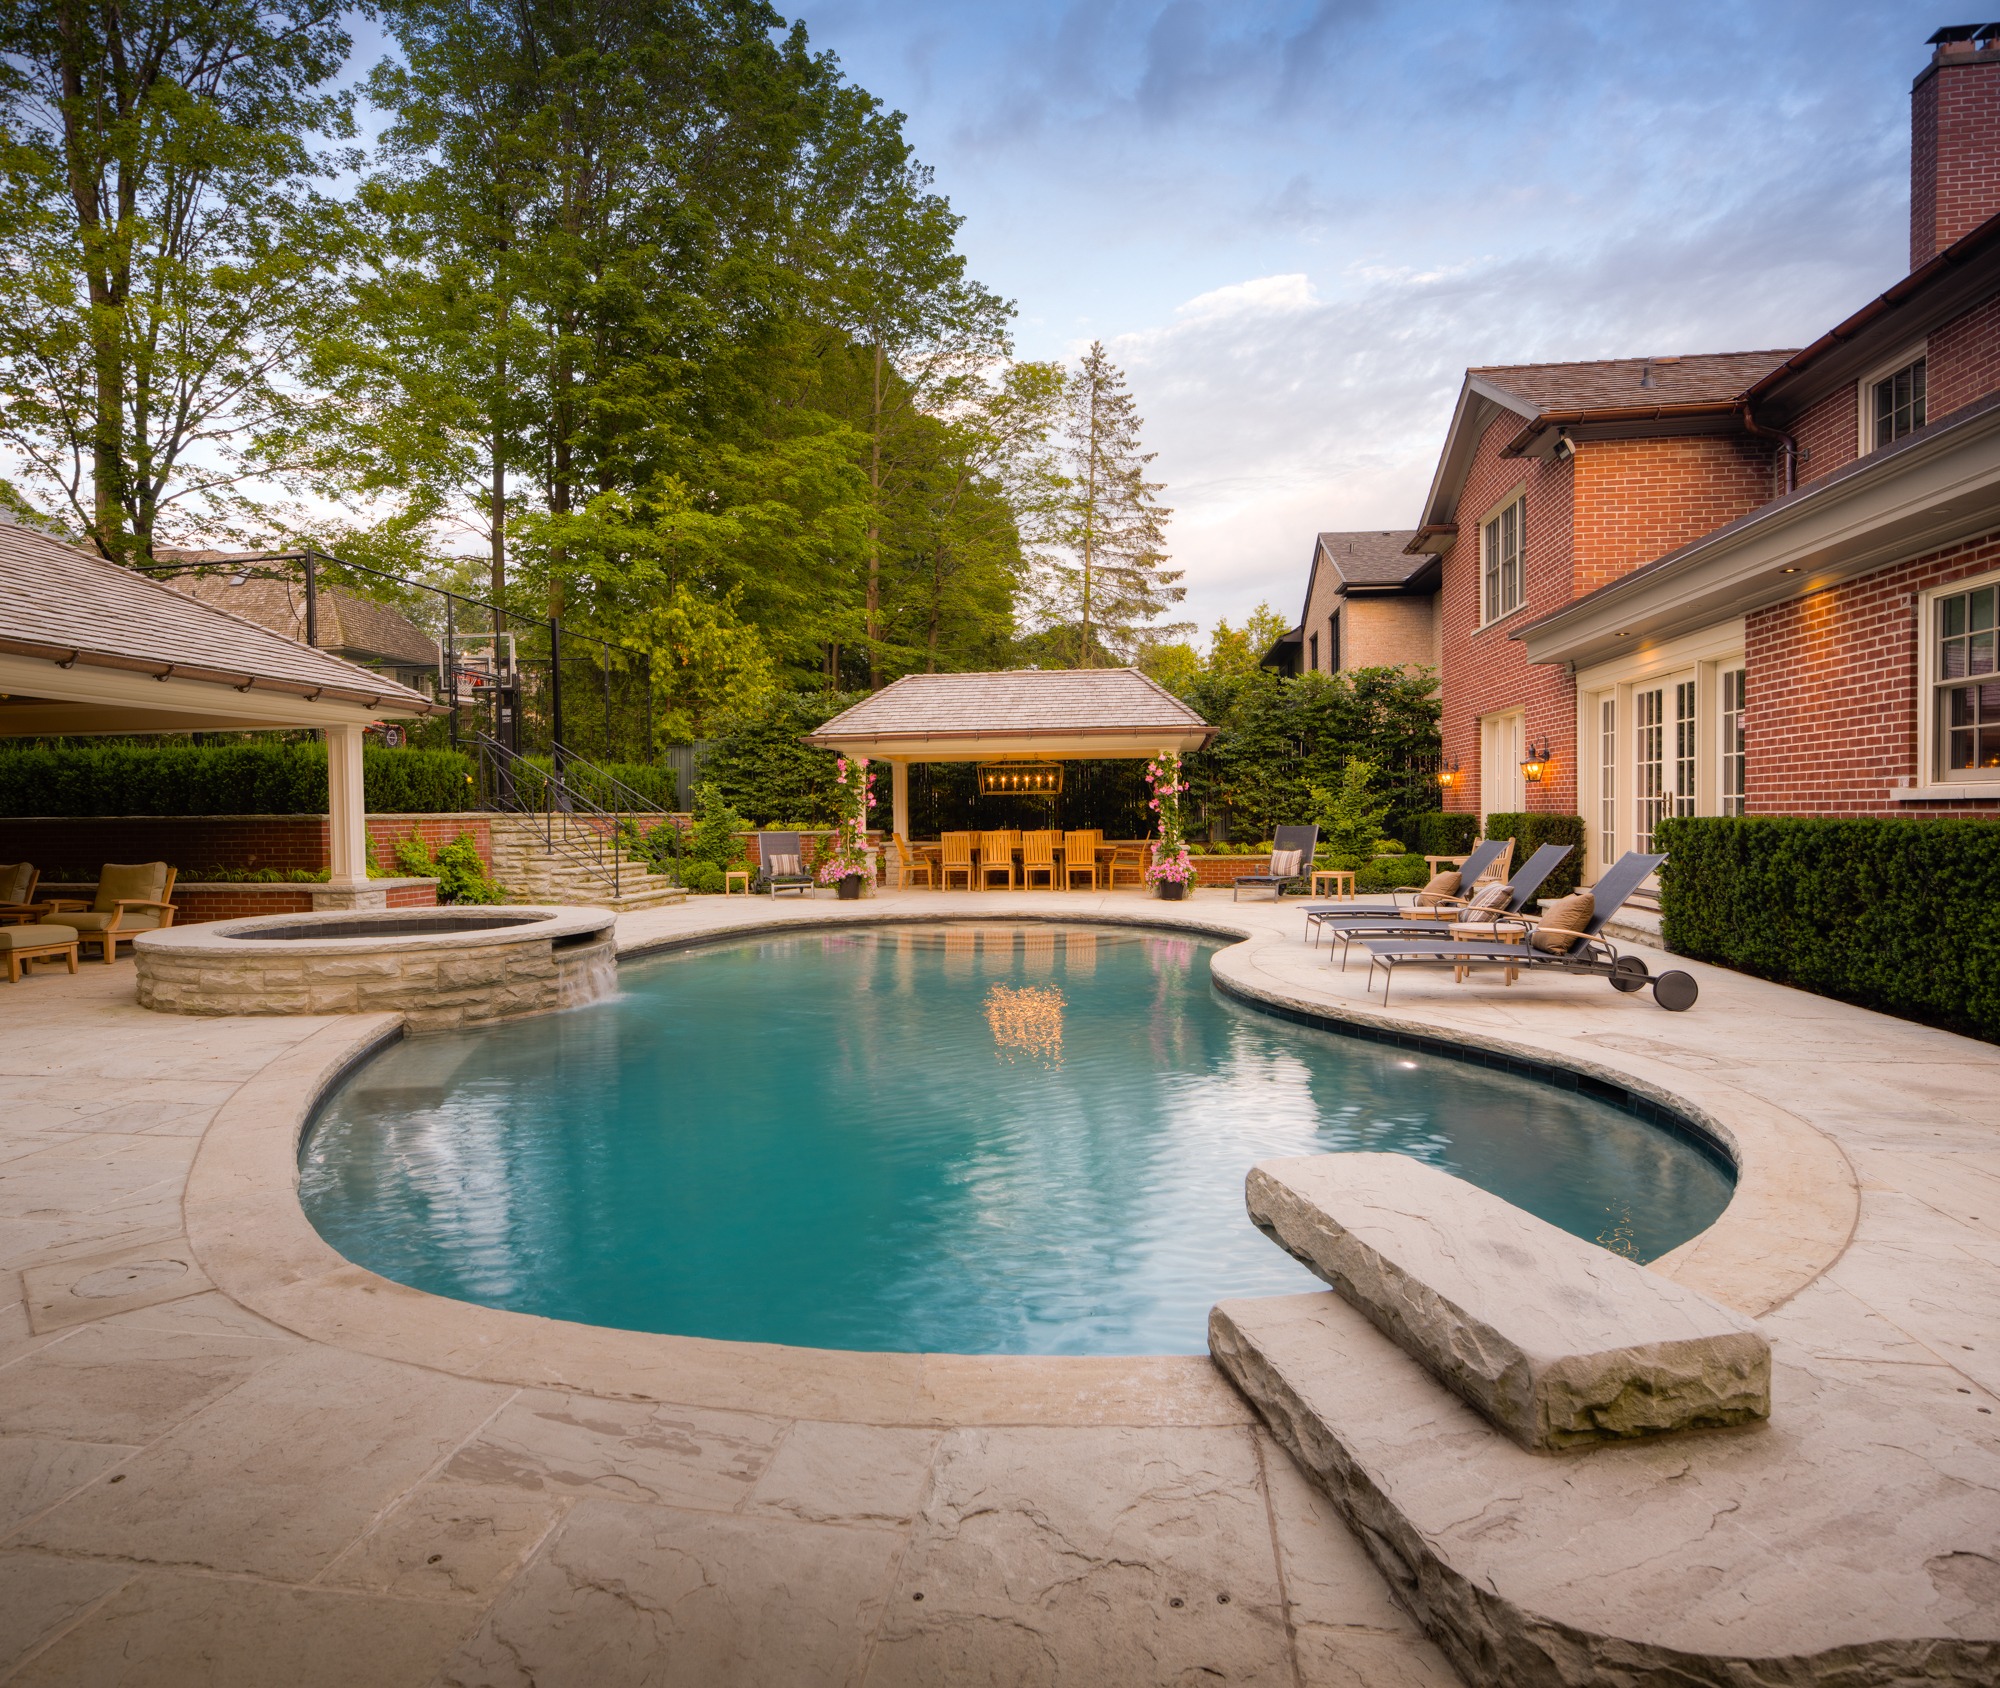 A luxurious backyard with an inground pool, stone patio, outdoor furniture, a covered dining area, and a brick house surrounded by lush trees at dusk.